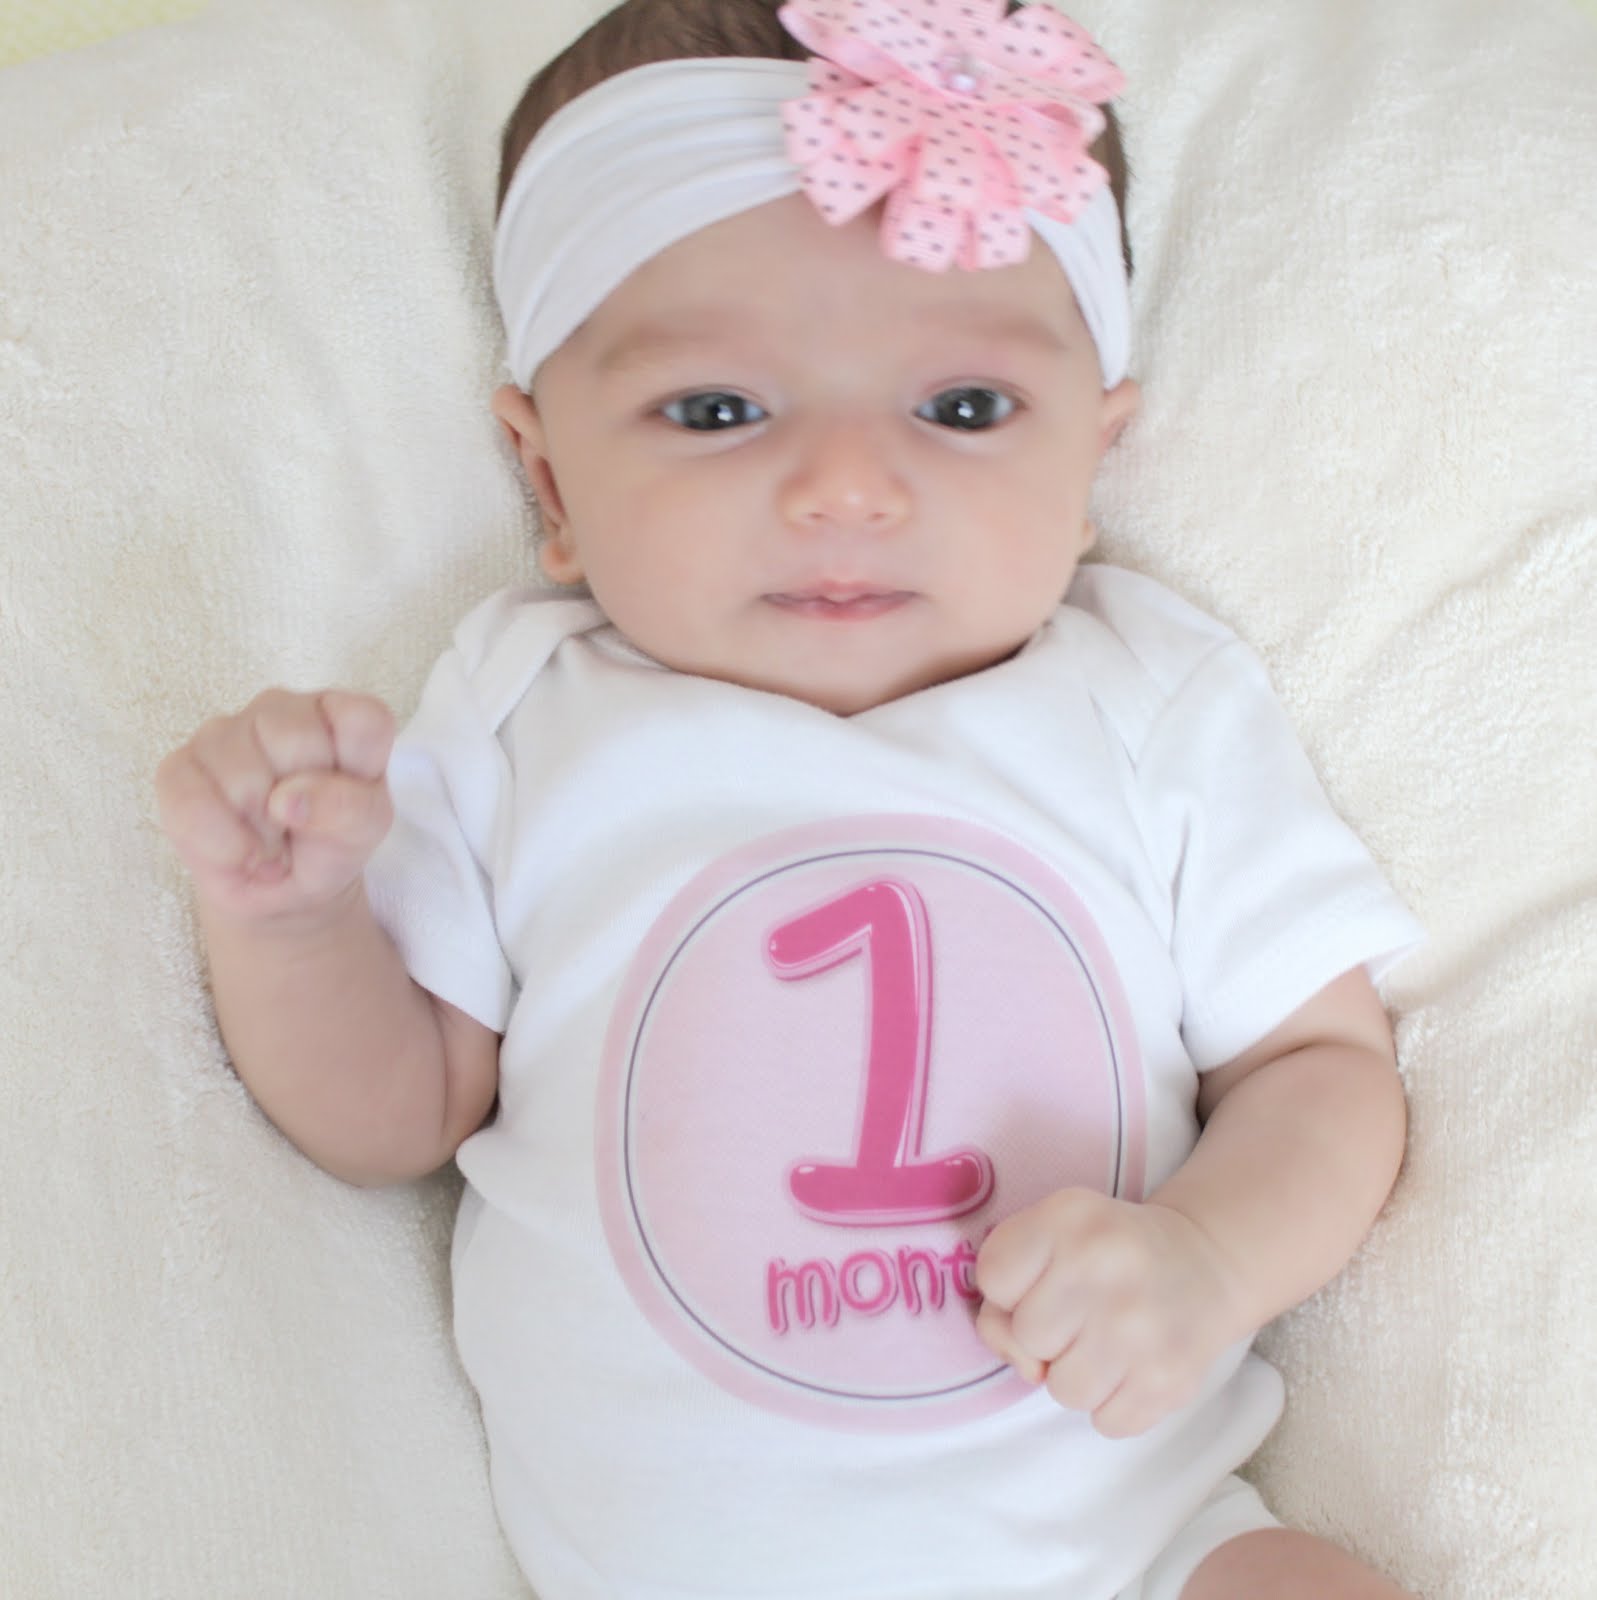 a baby at one month